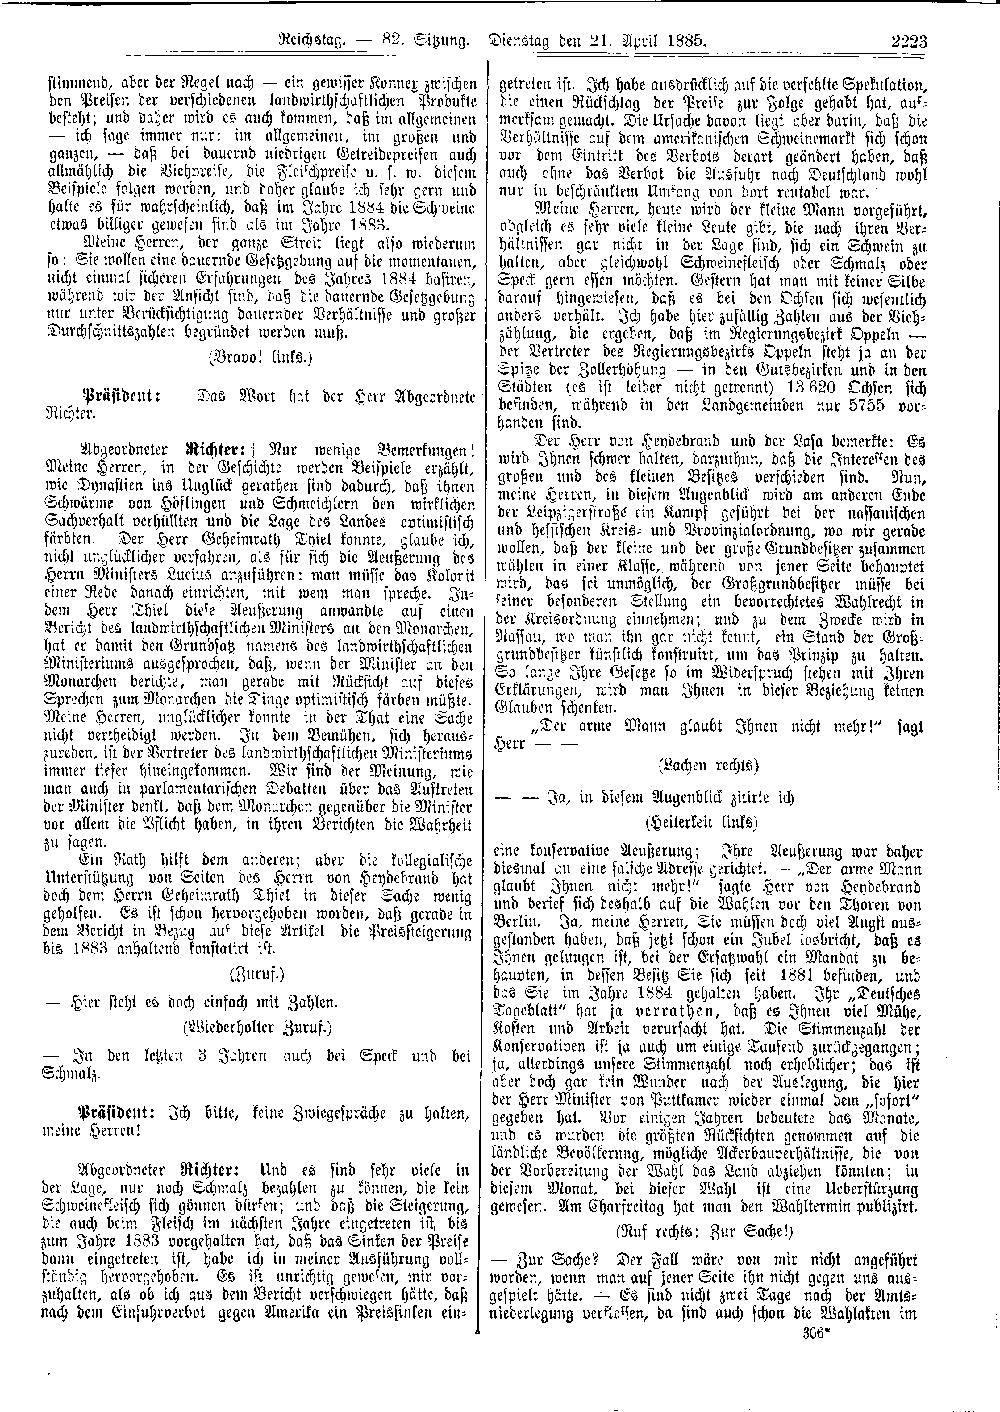 Scan of page 2223